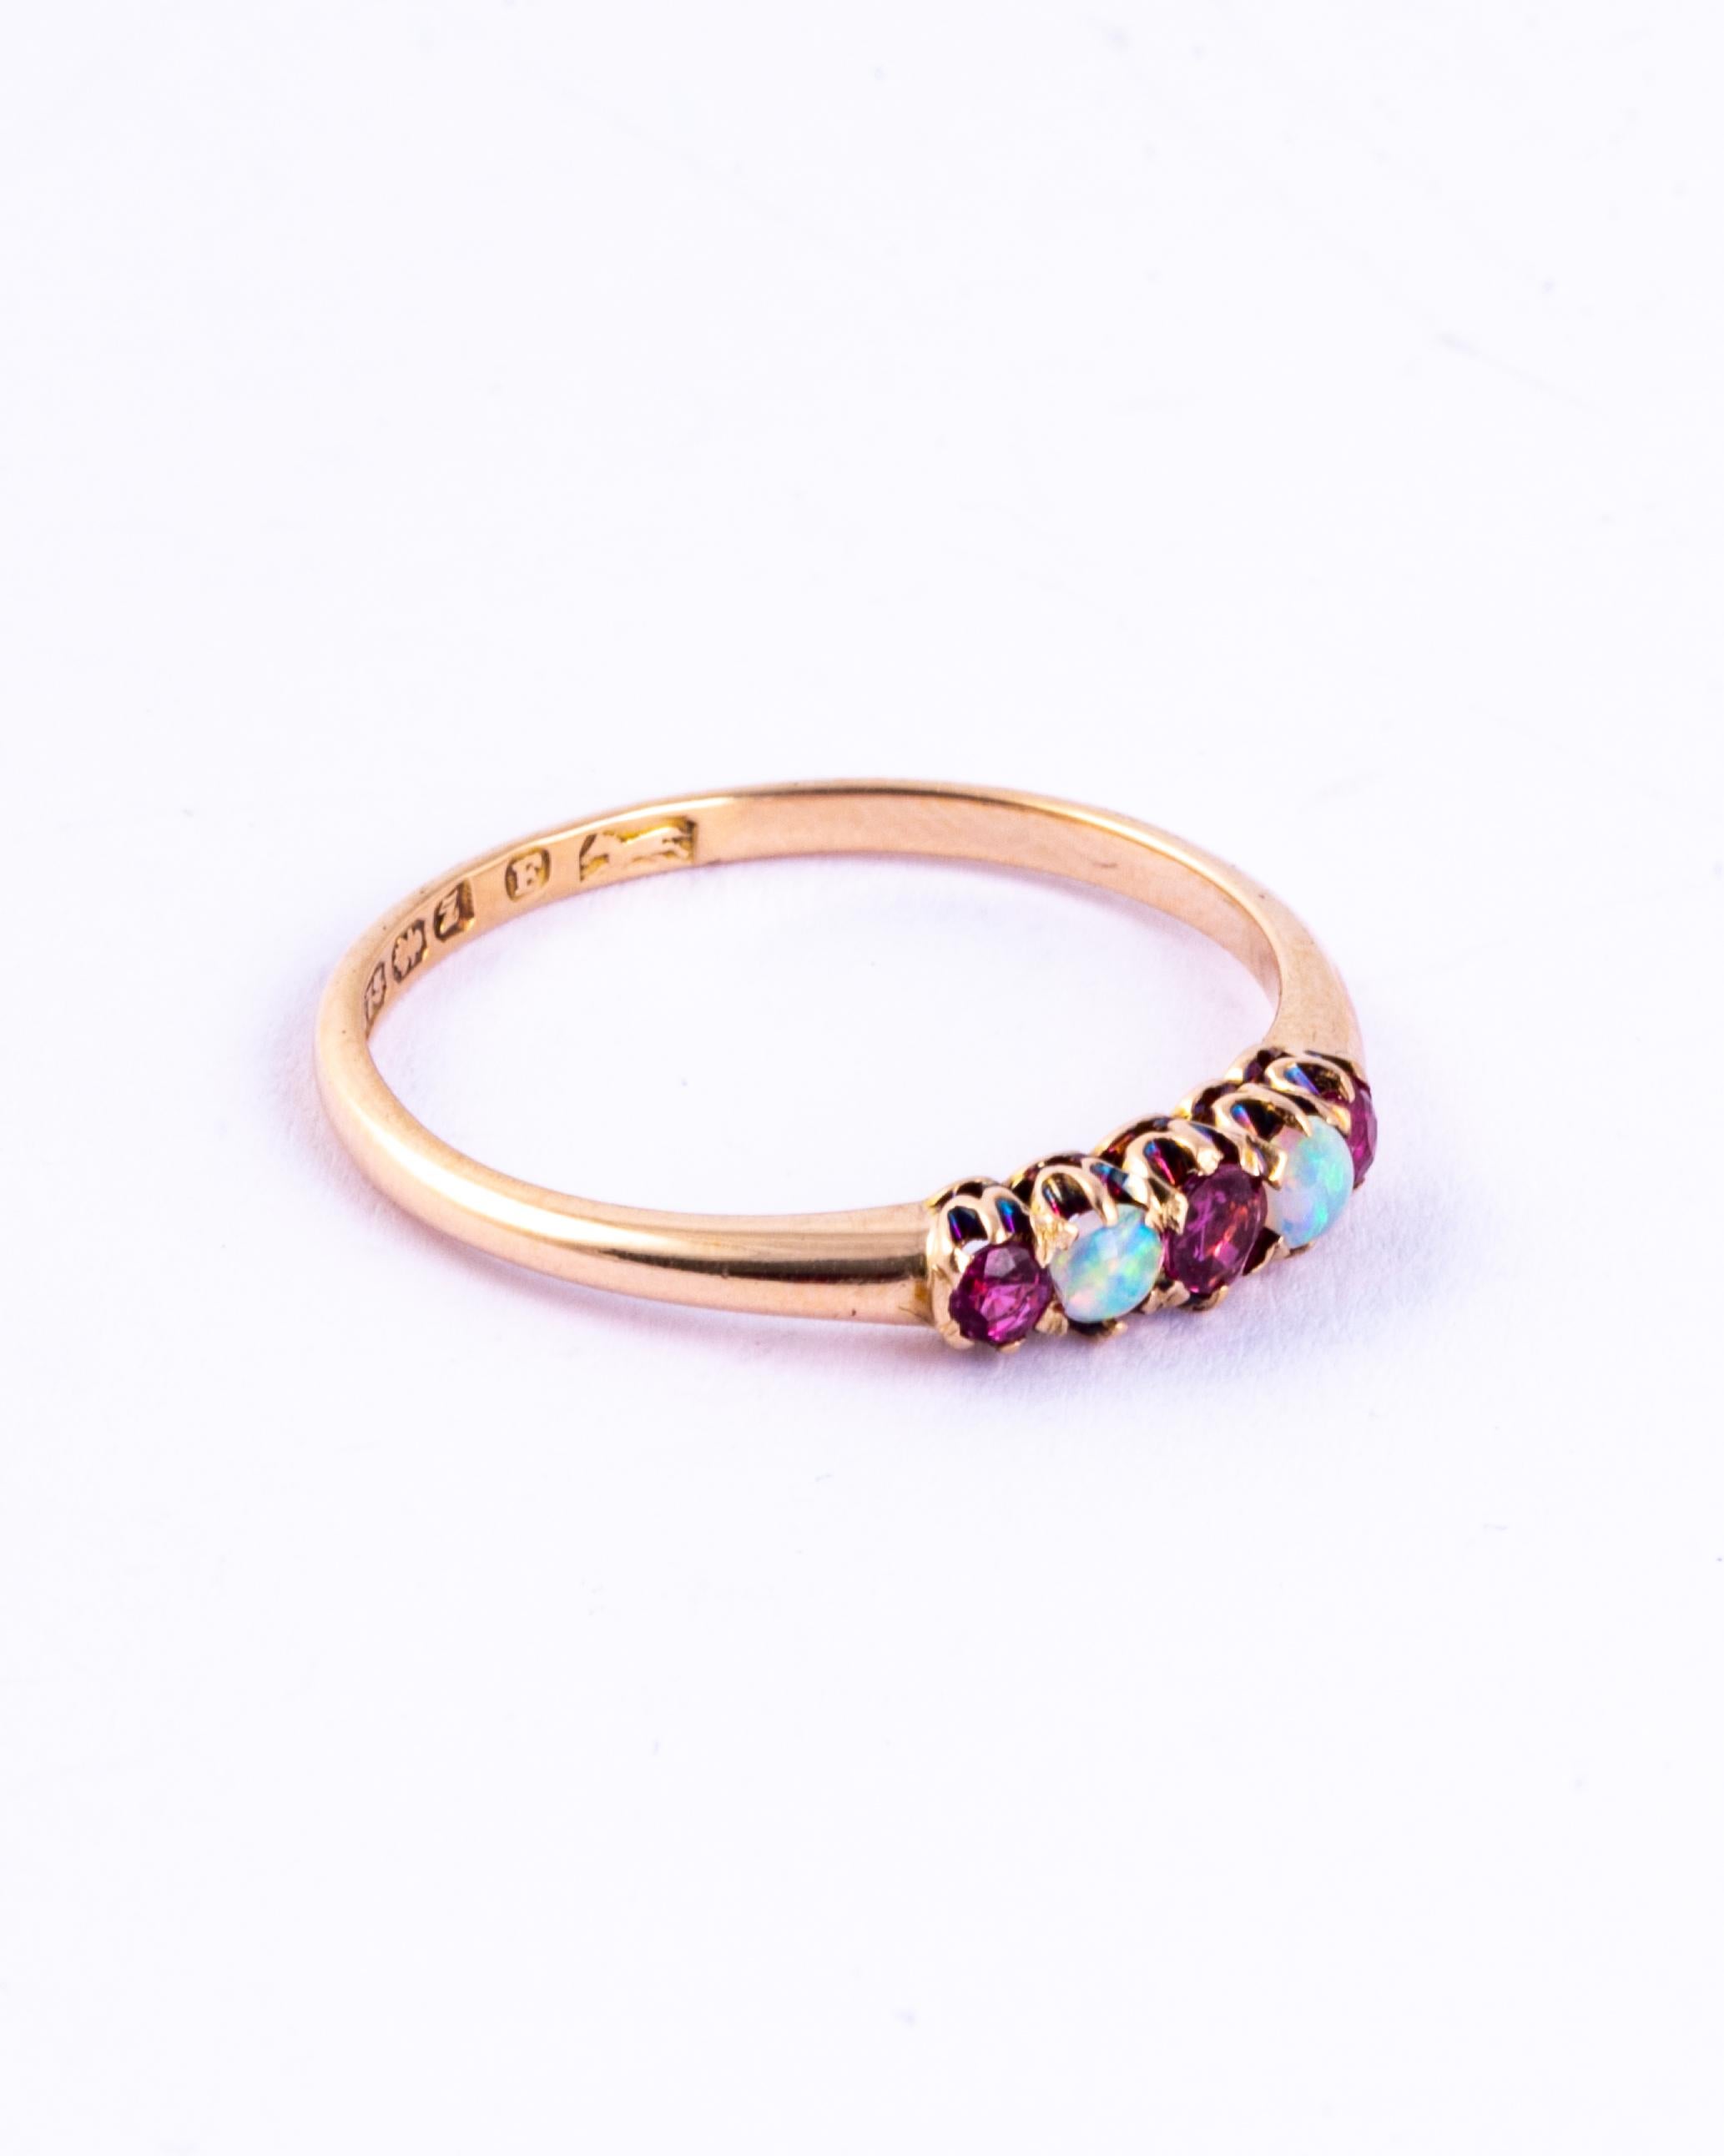 Cabochon Edwardian Opal and Ruby 9 Carat Gold Five-Stone Ring